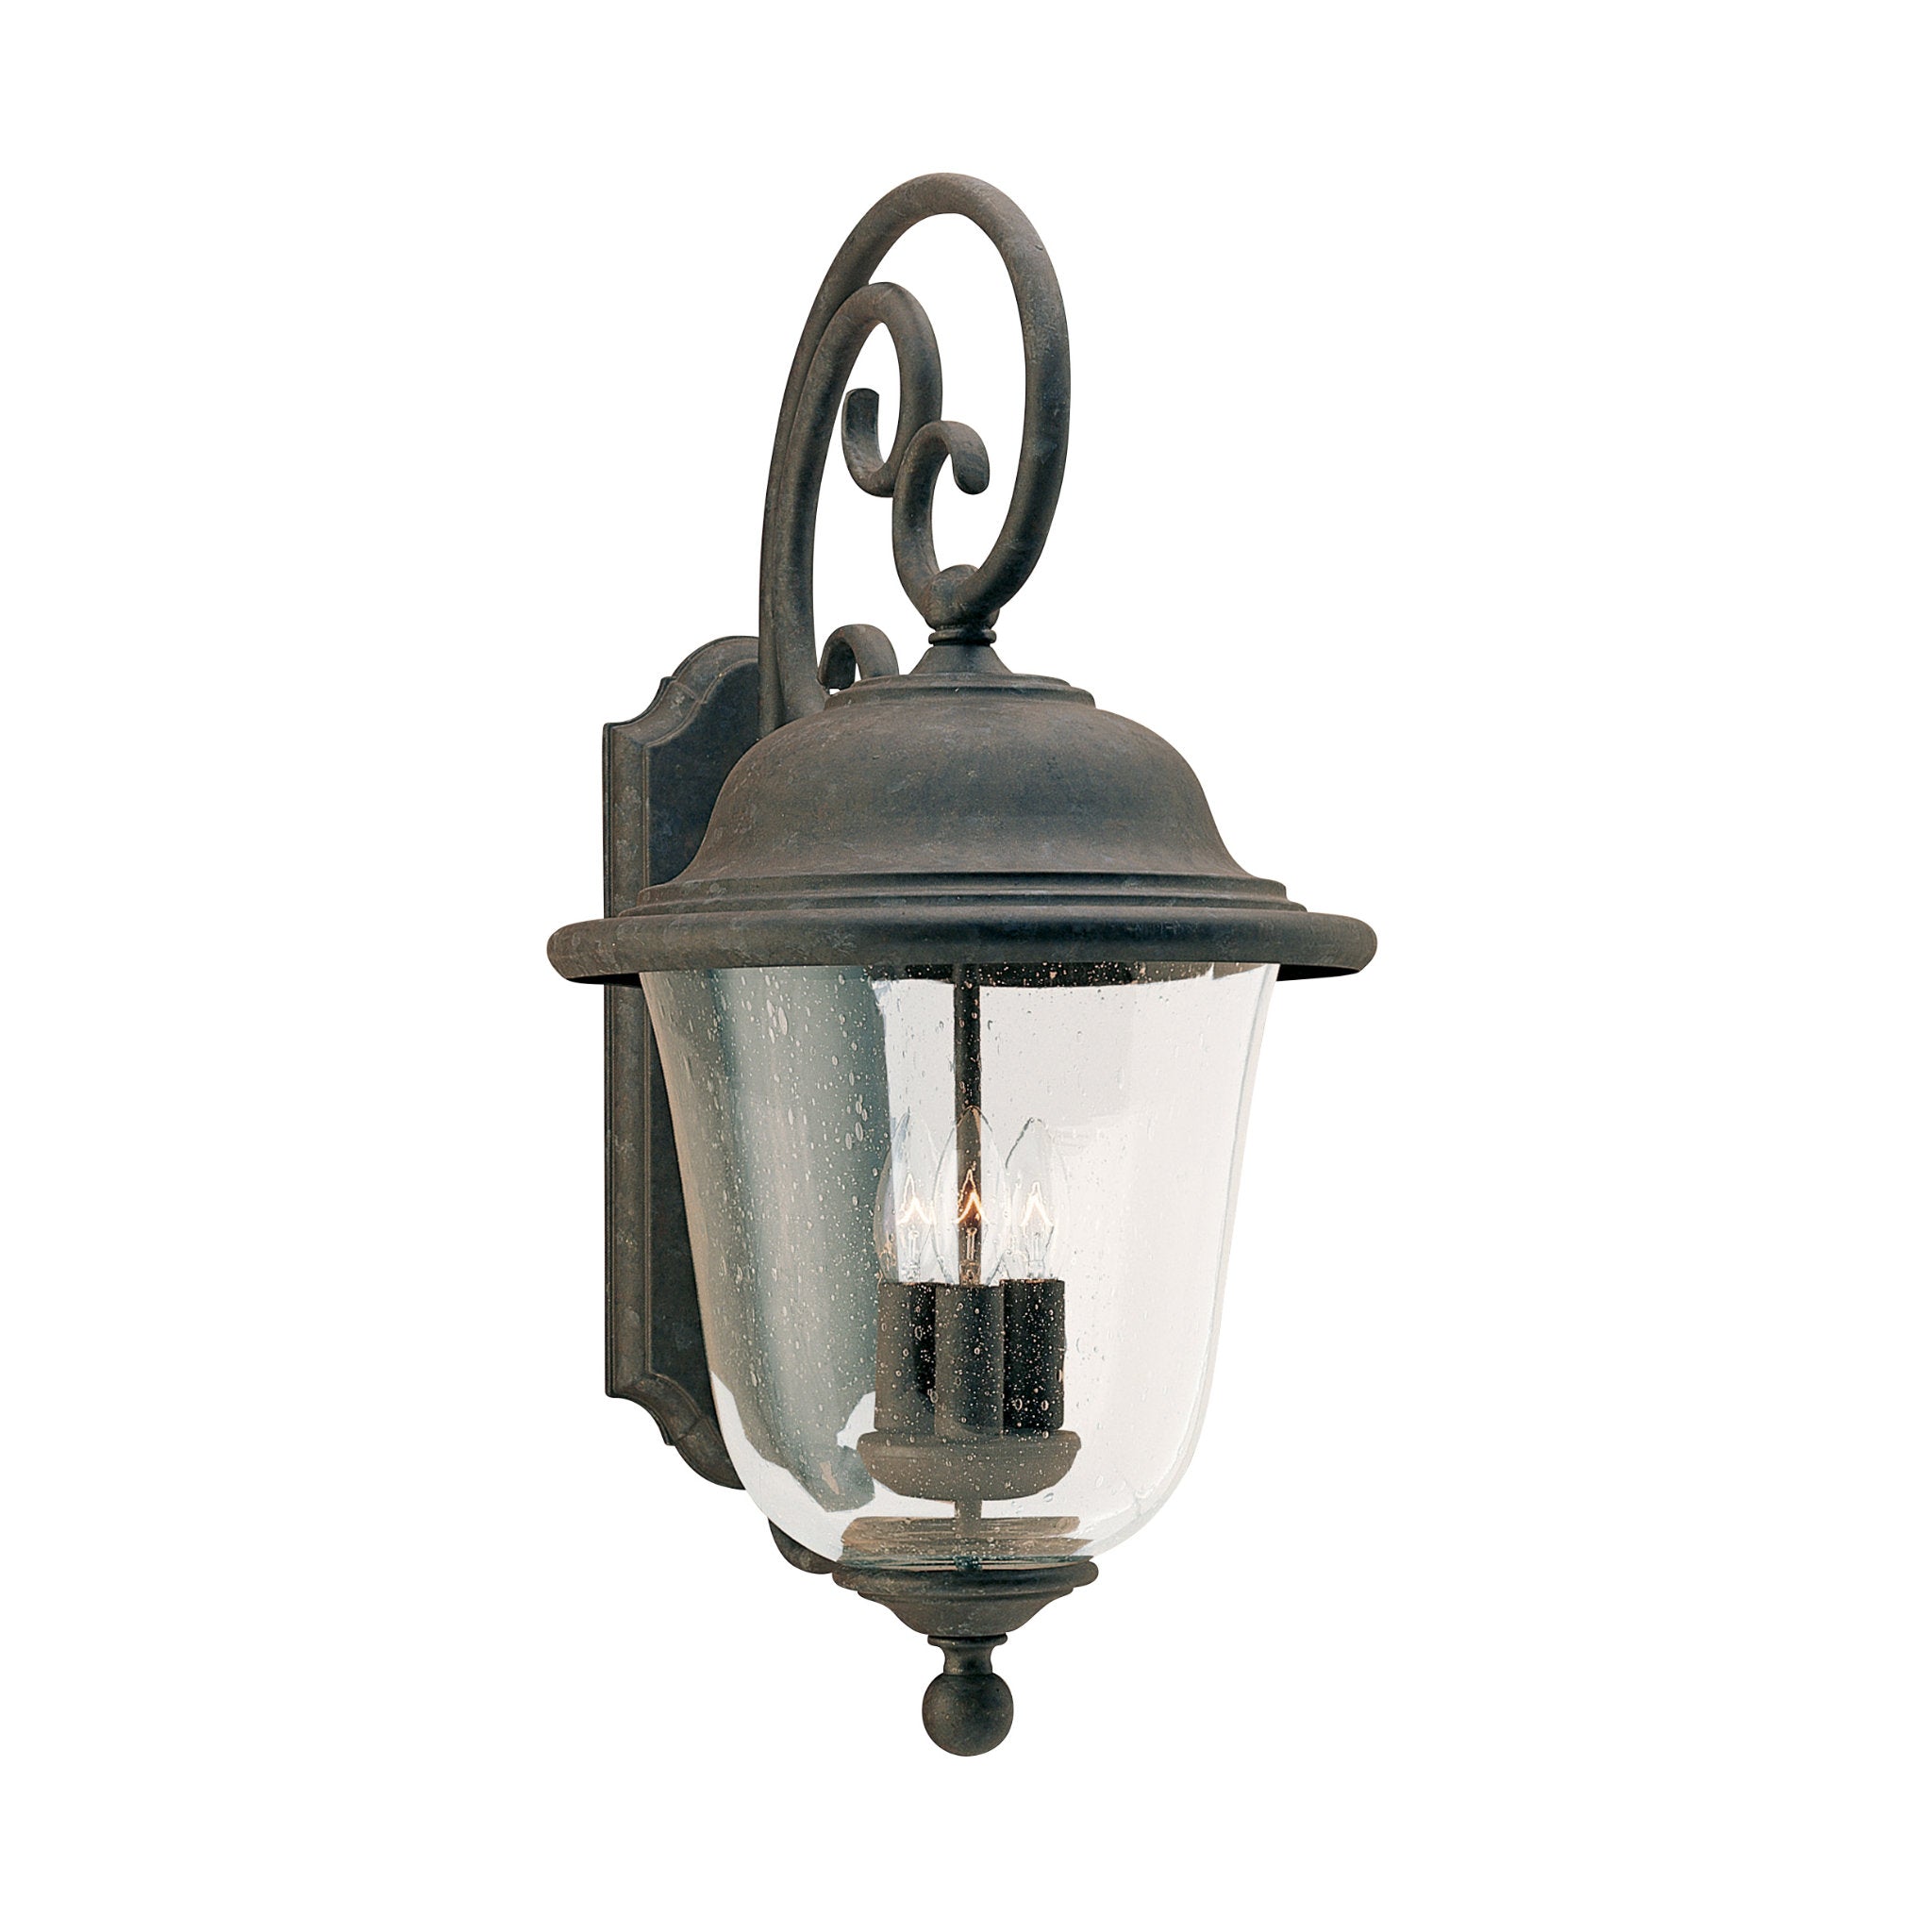 Trafalgar Three Light Outdoor Wall Lantern Traditional Fixture 12.25" Width 23.5" Height Aluminum Round Clear Seeded Shade in Oxidized Bronze